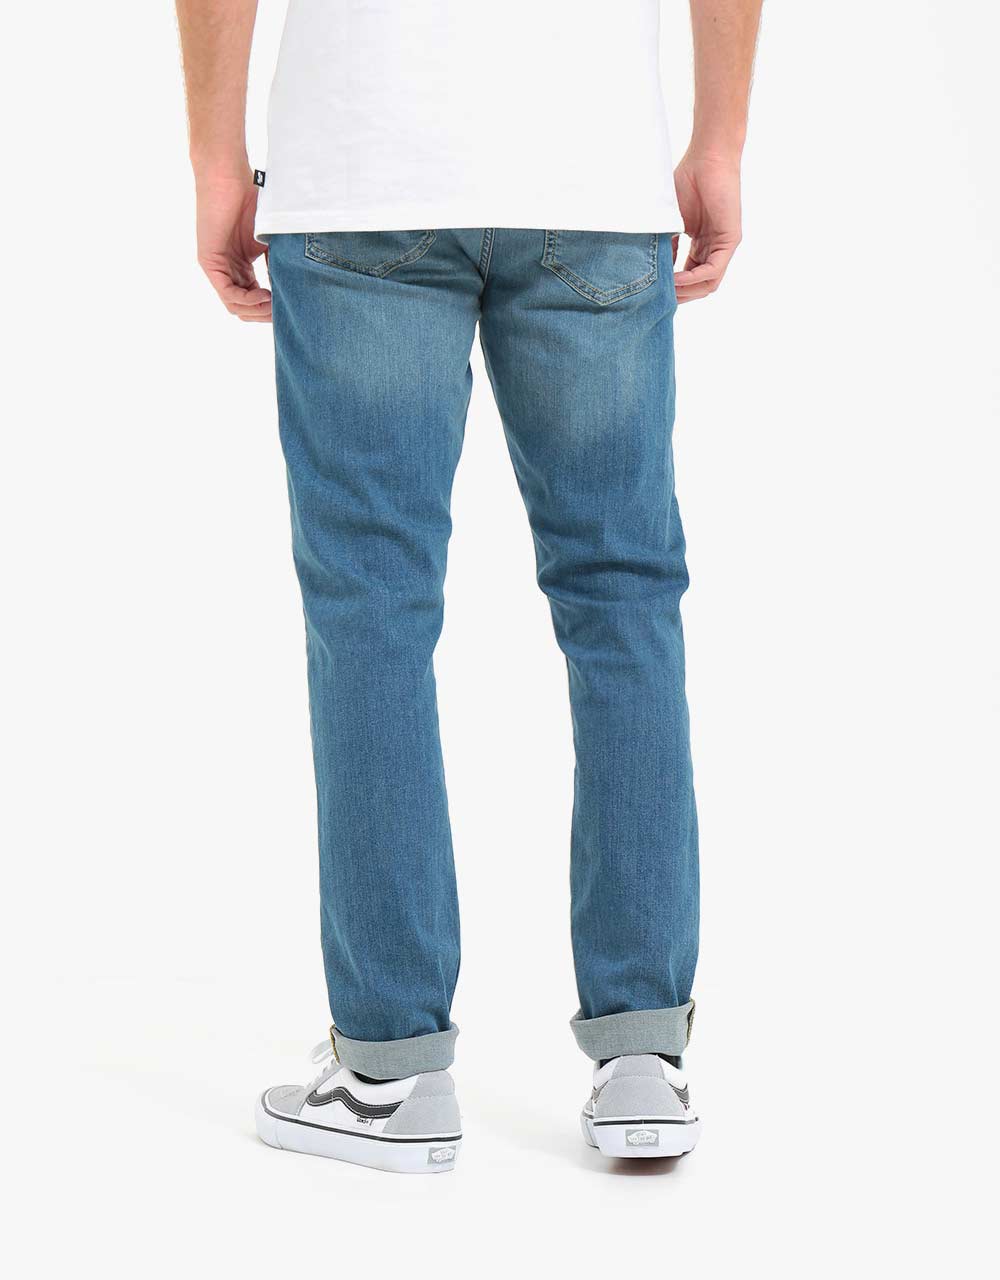 Route One Slim Denim Jeans - Washed Blue